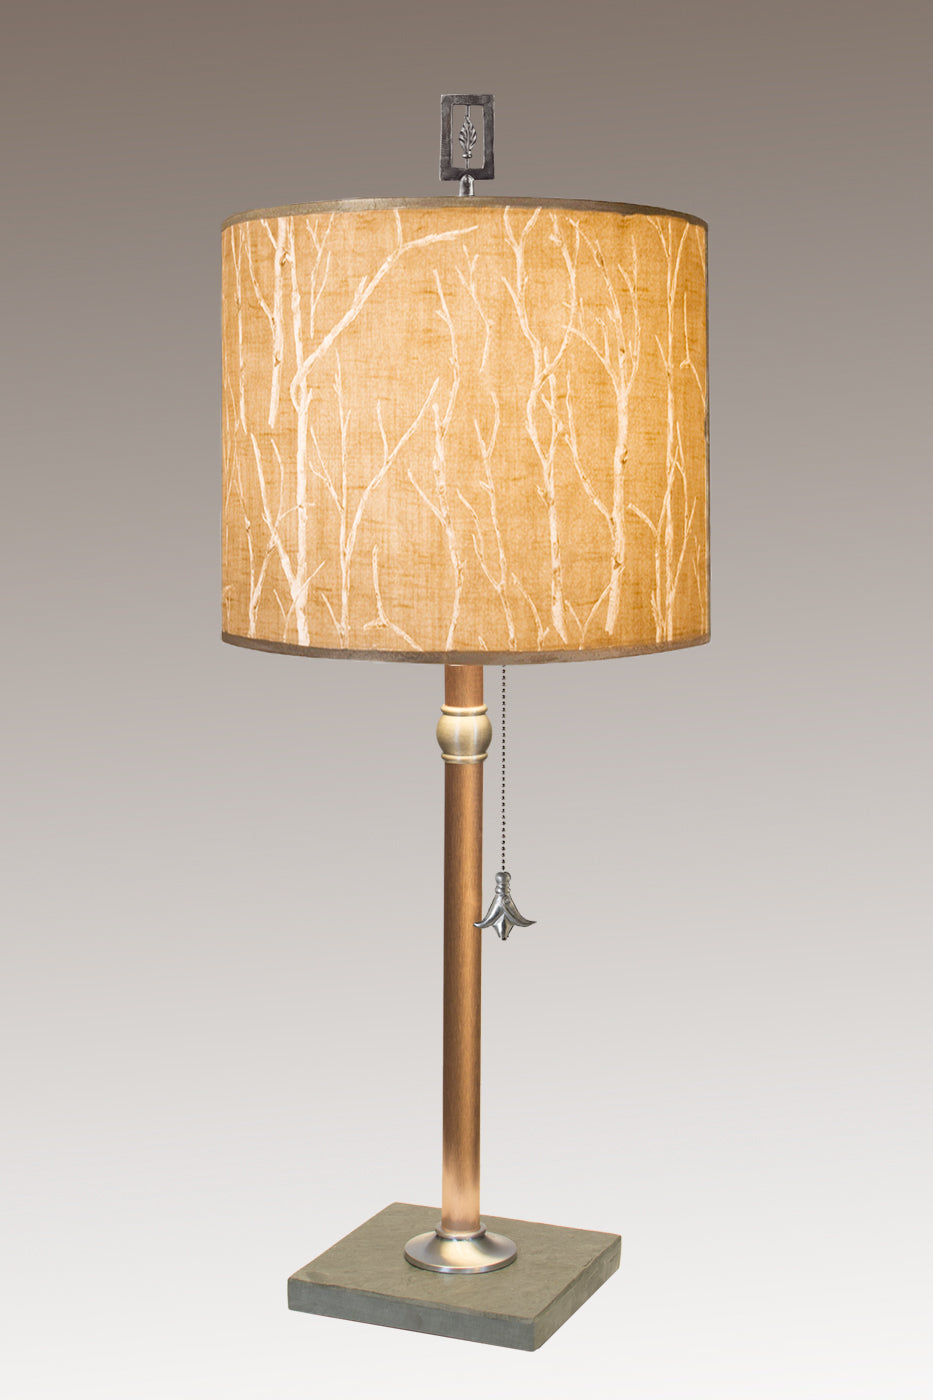 Janna Ugone & Co Table Lamps Copper Table Lamp with Medium Drum Shade in Twigs